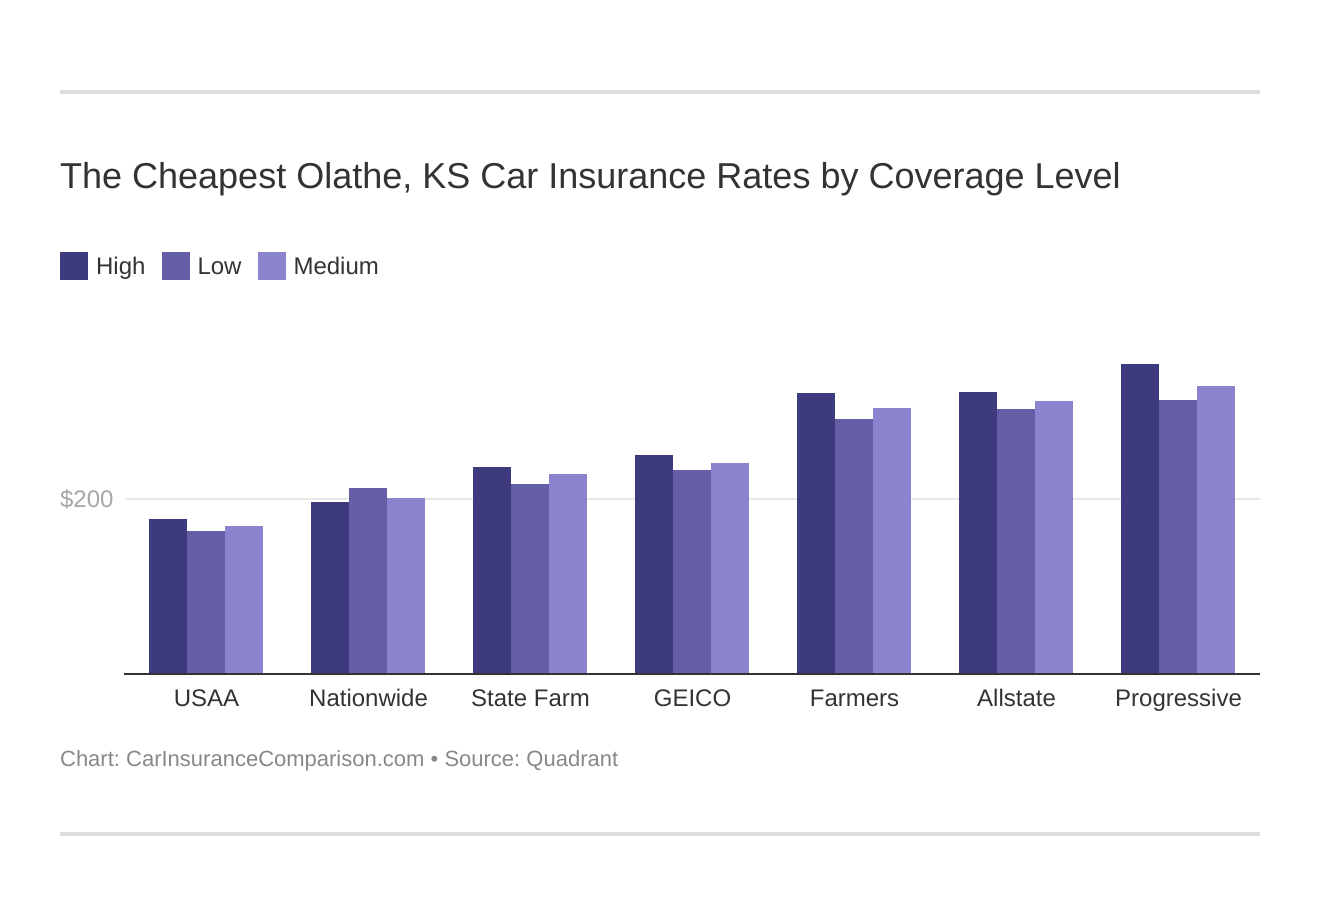 The Cheapest Olathe, KS Car Insurance Rates by Coverage Level